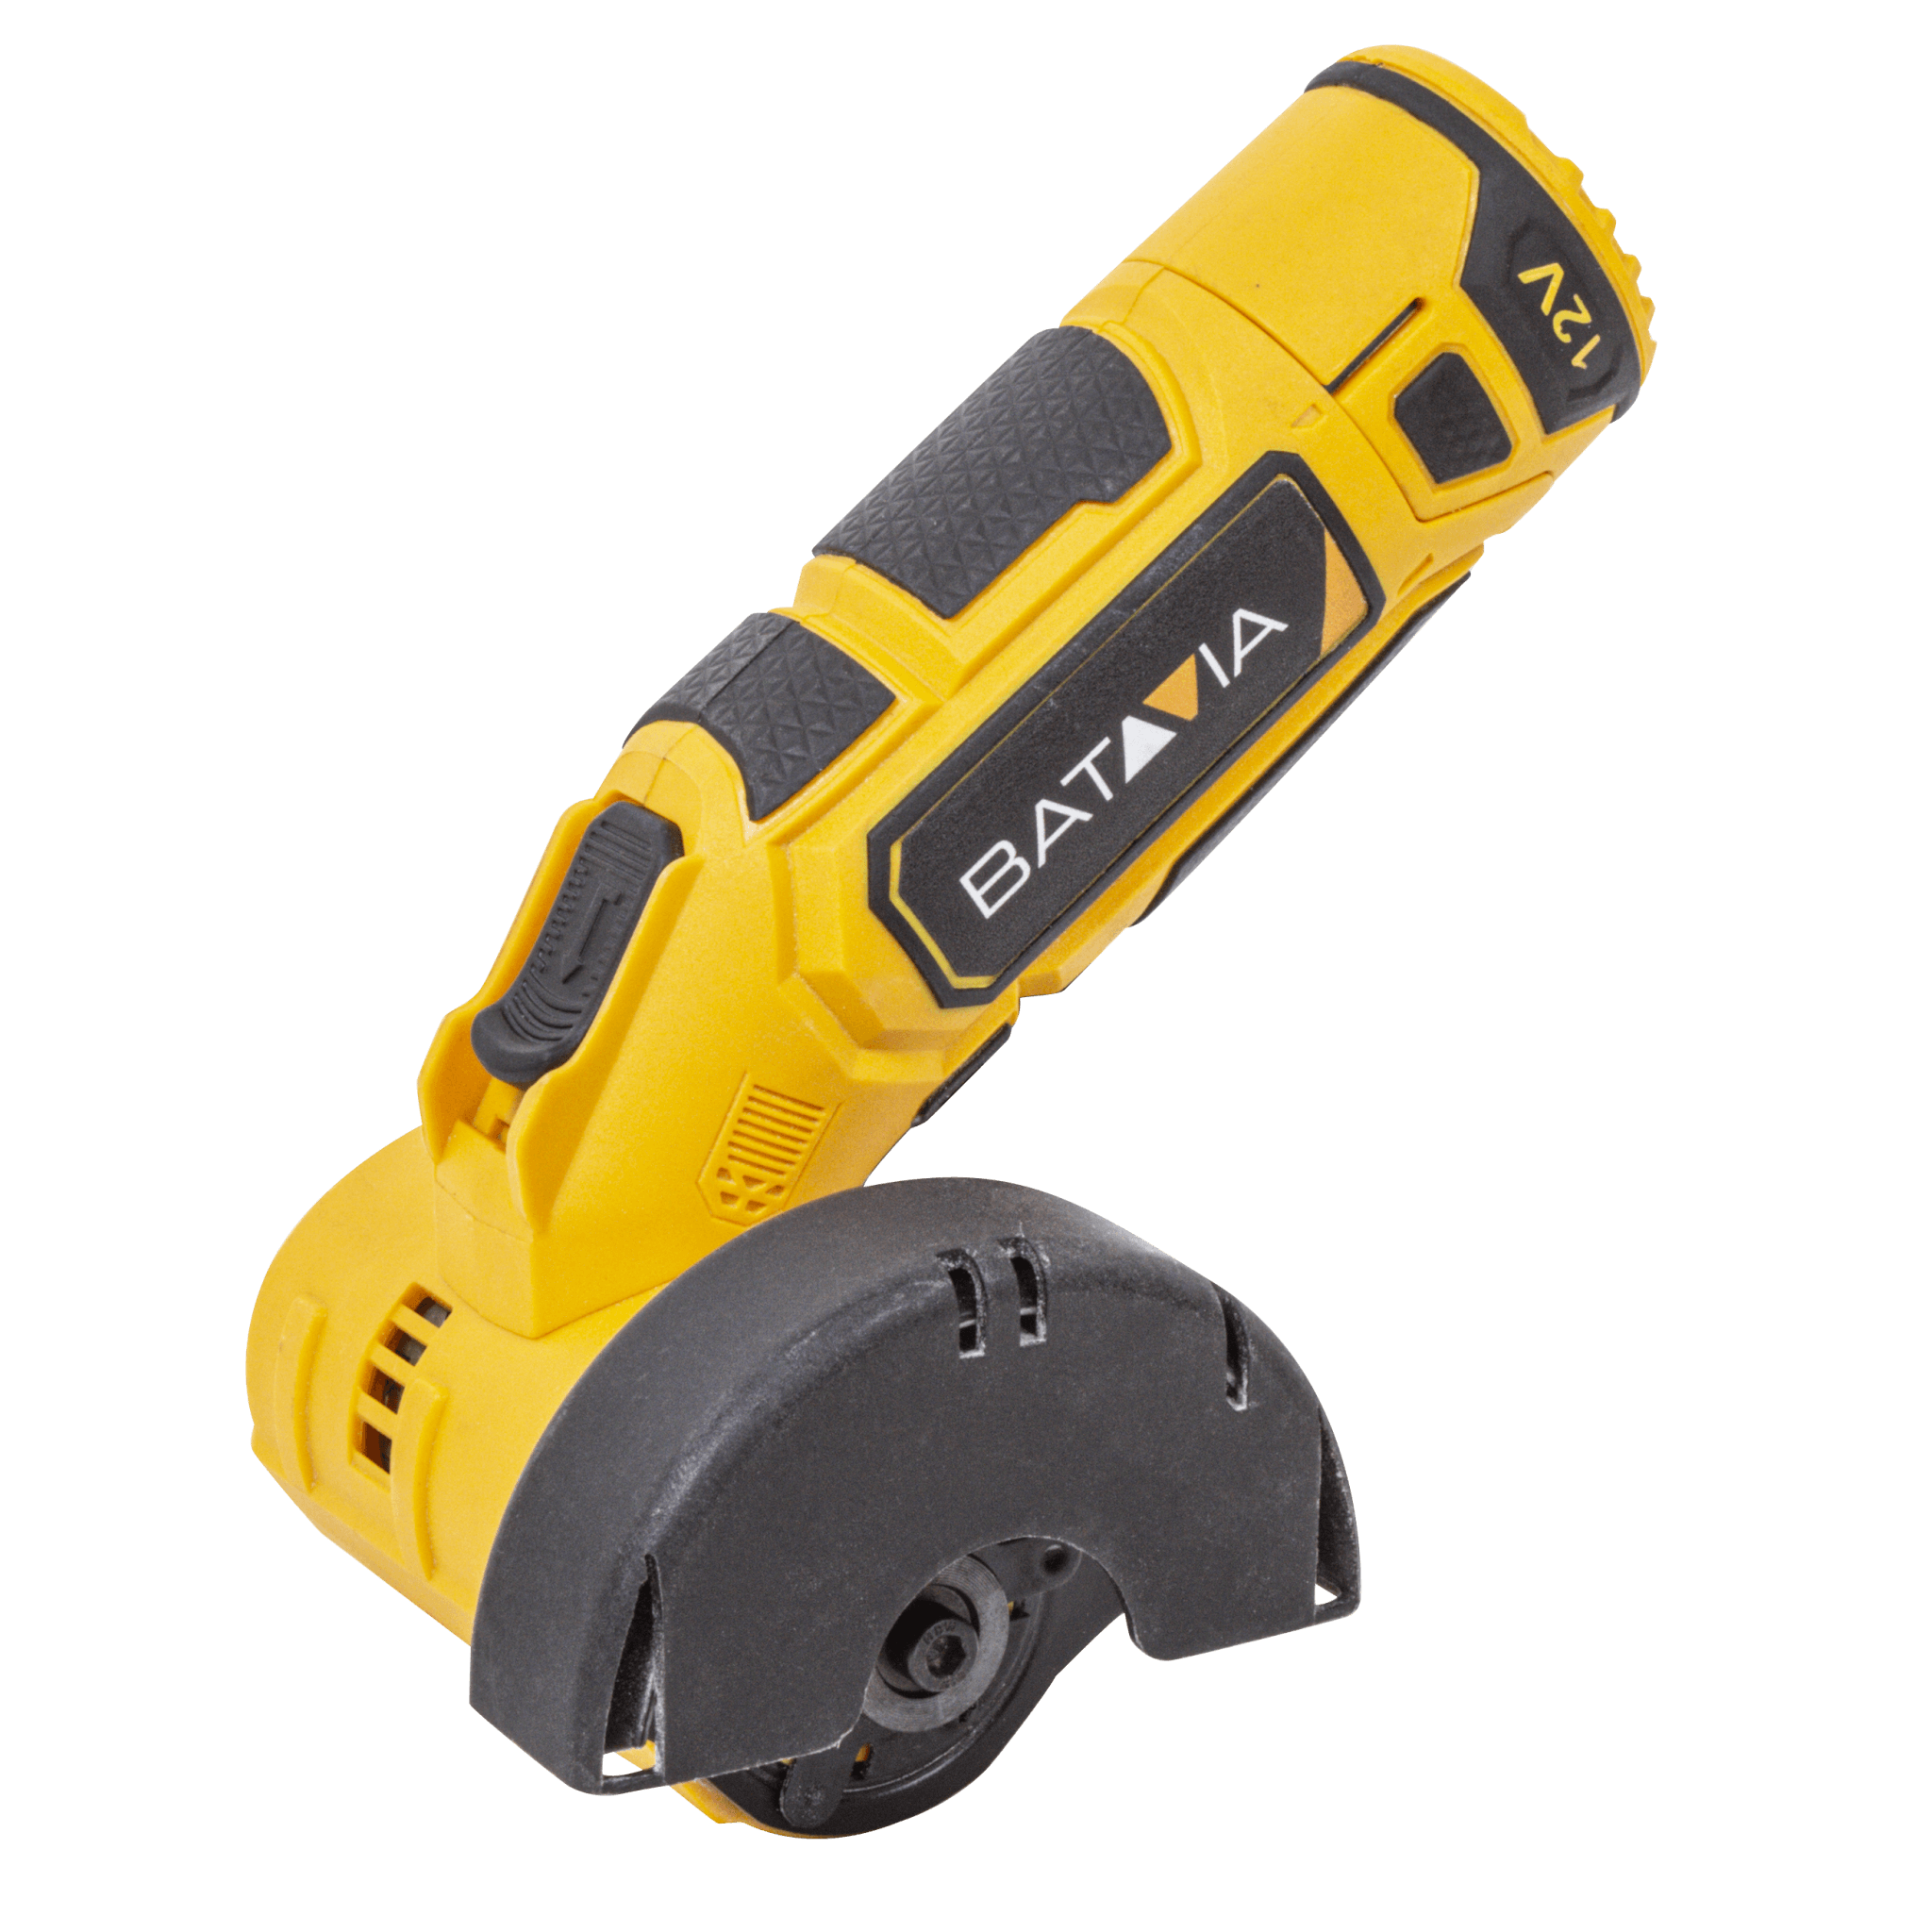 Cordless angle grinder | 12V Fixxpack collection | Batavia